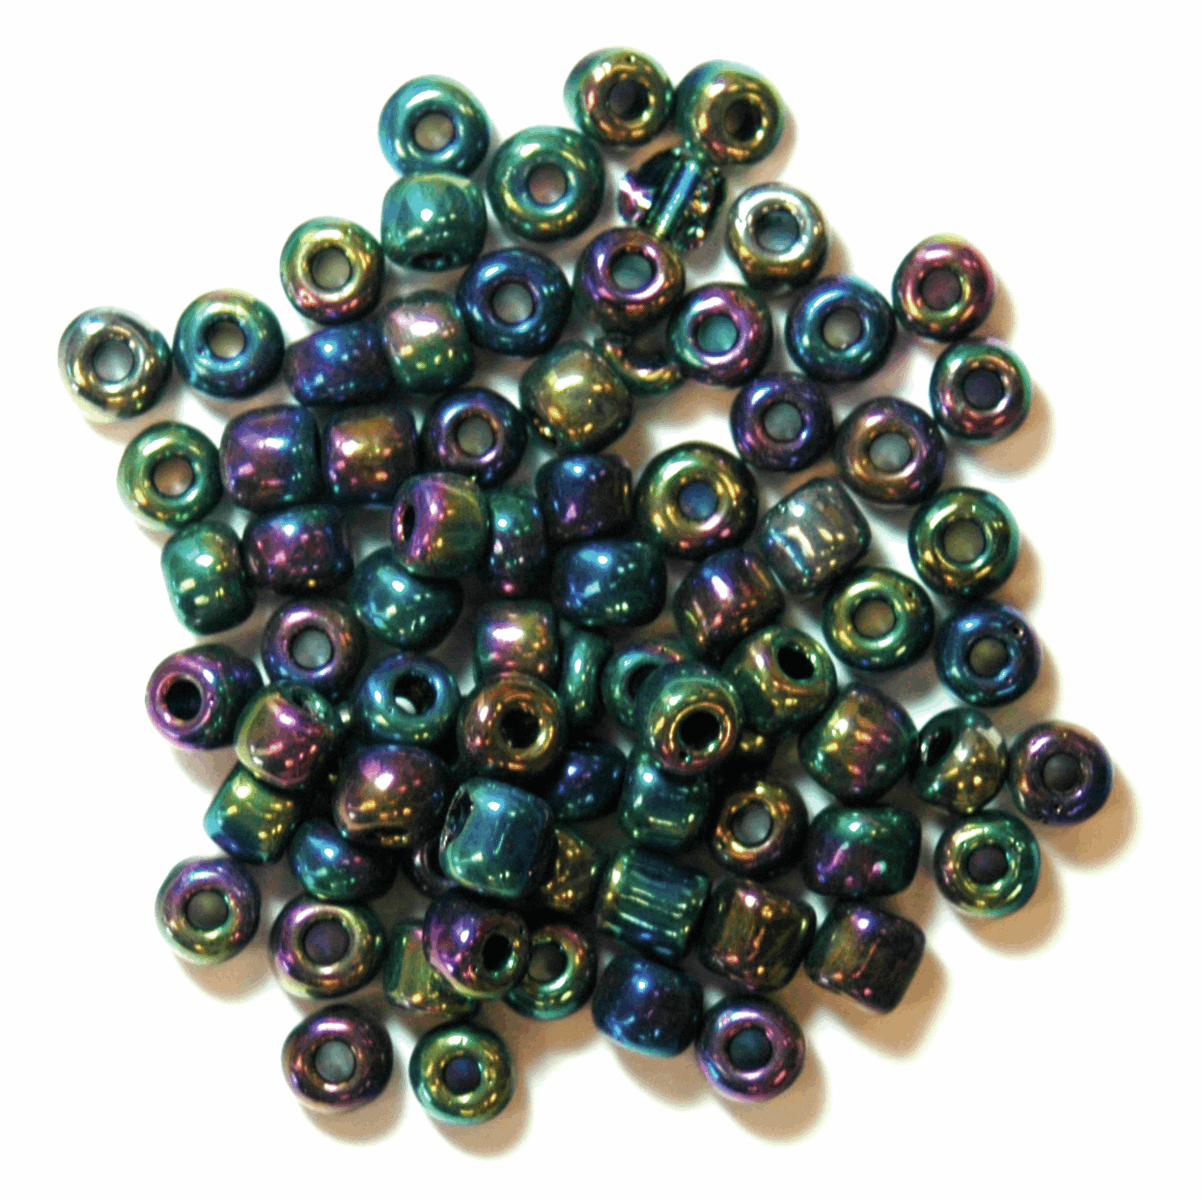 Trimits Rainbow E Beads - 4mm (Pack of 15g)